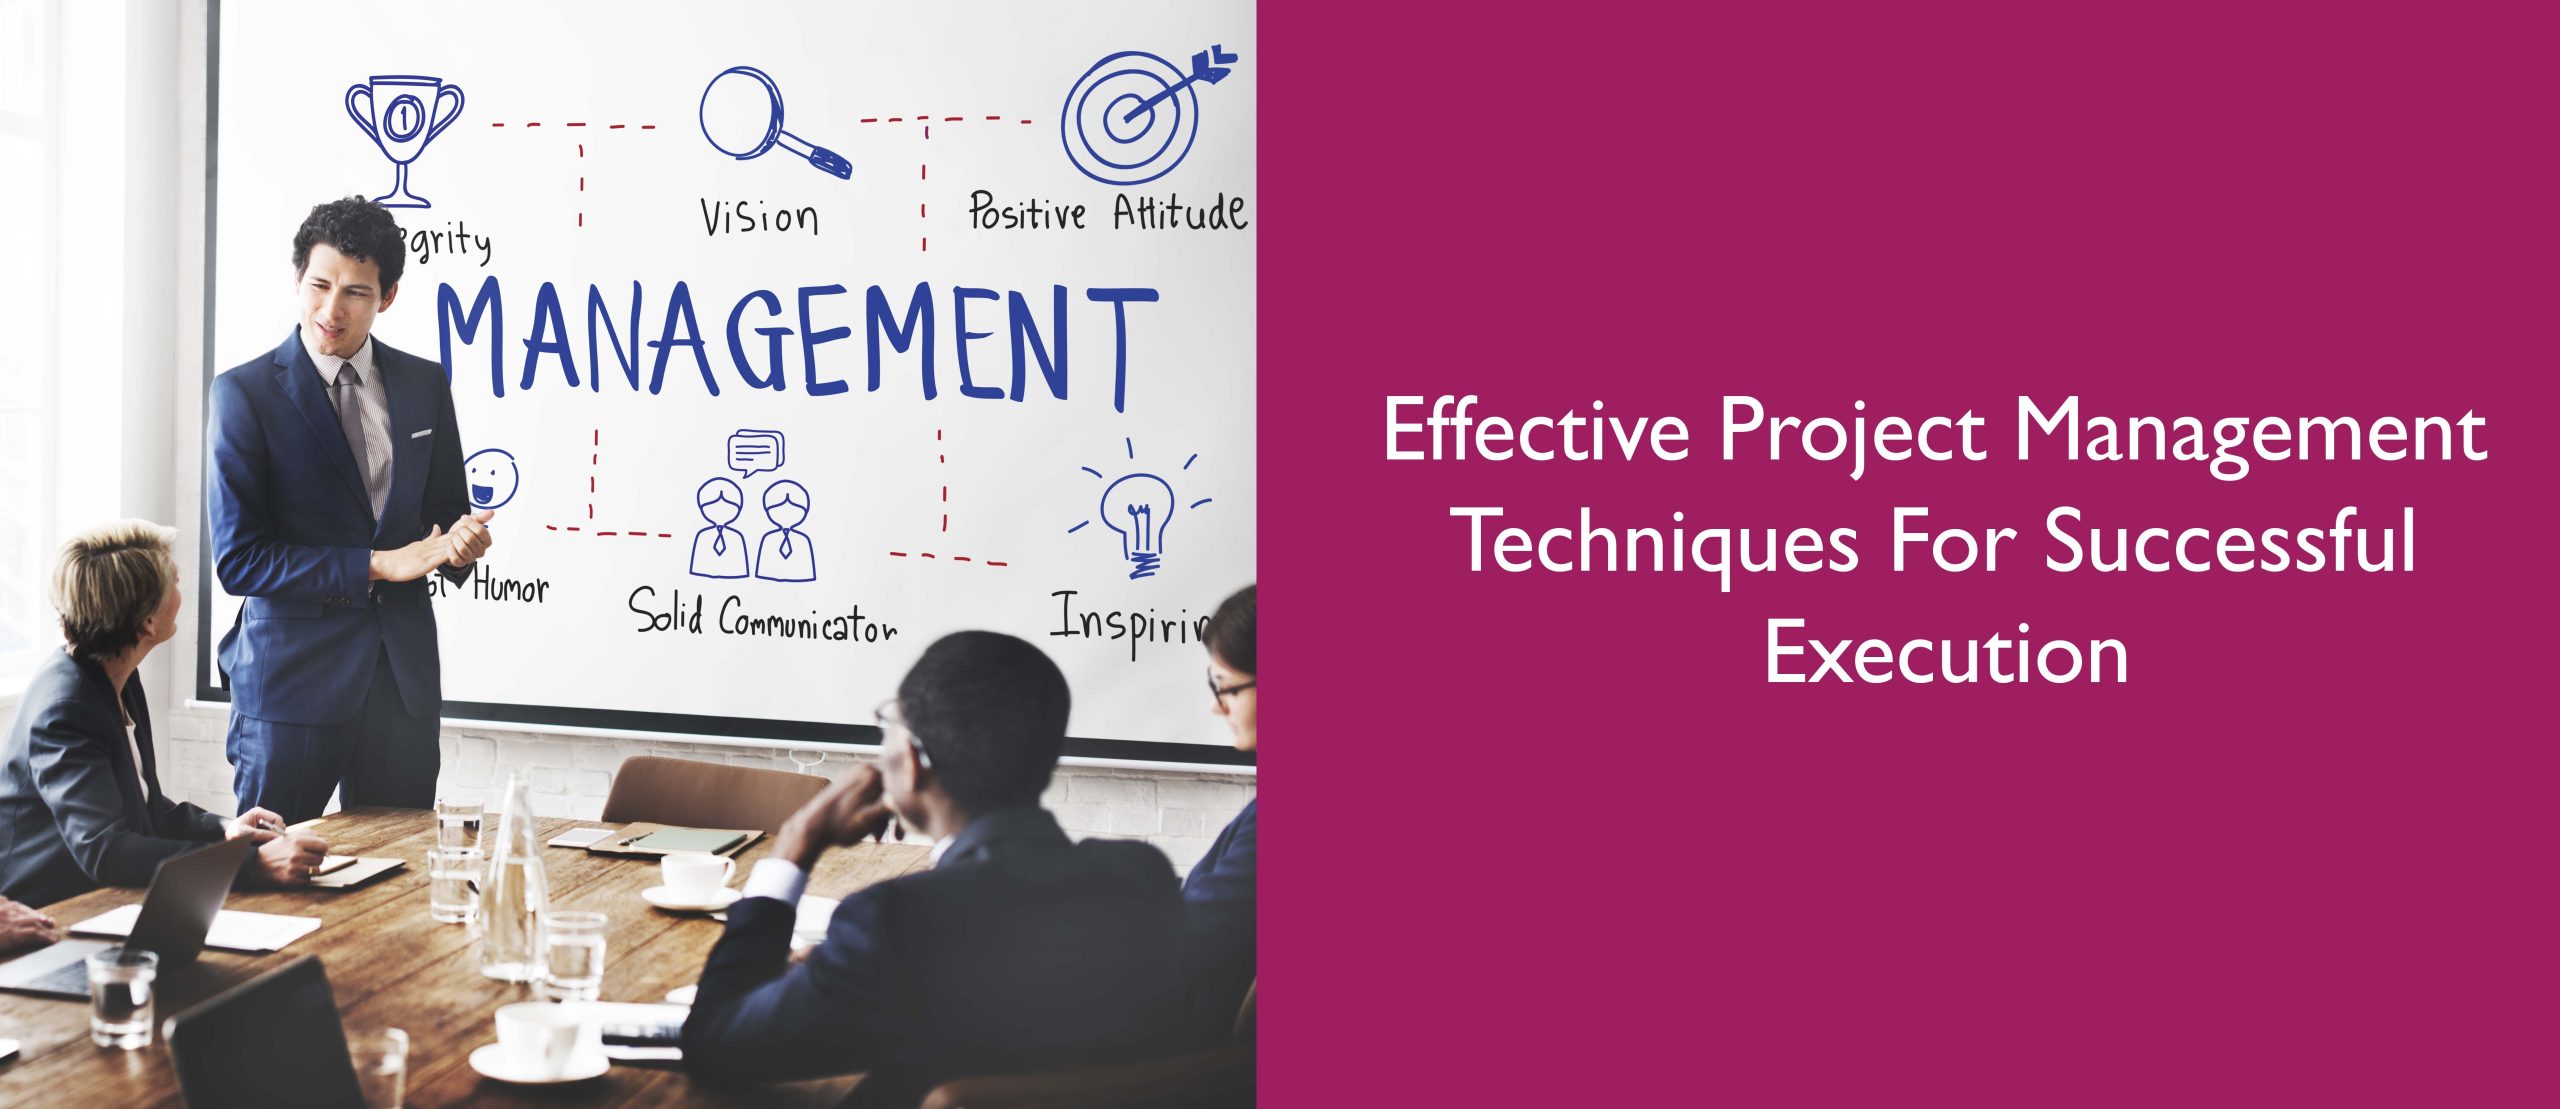 Effective Project Management Techniques For Successful Execution